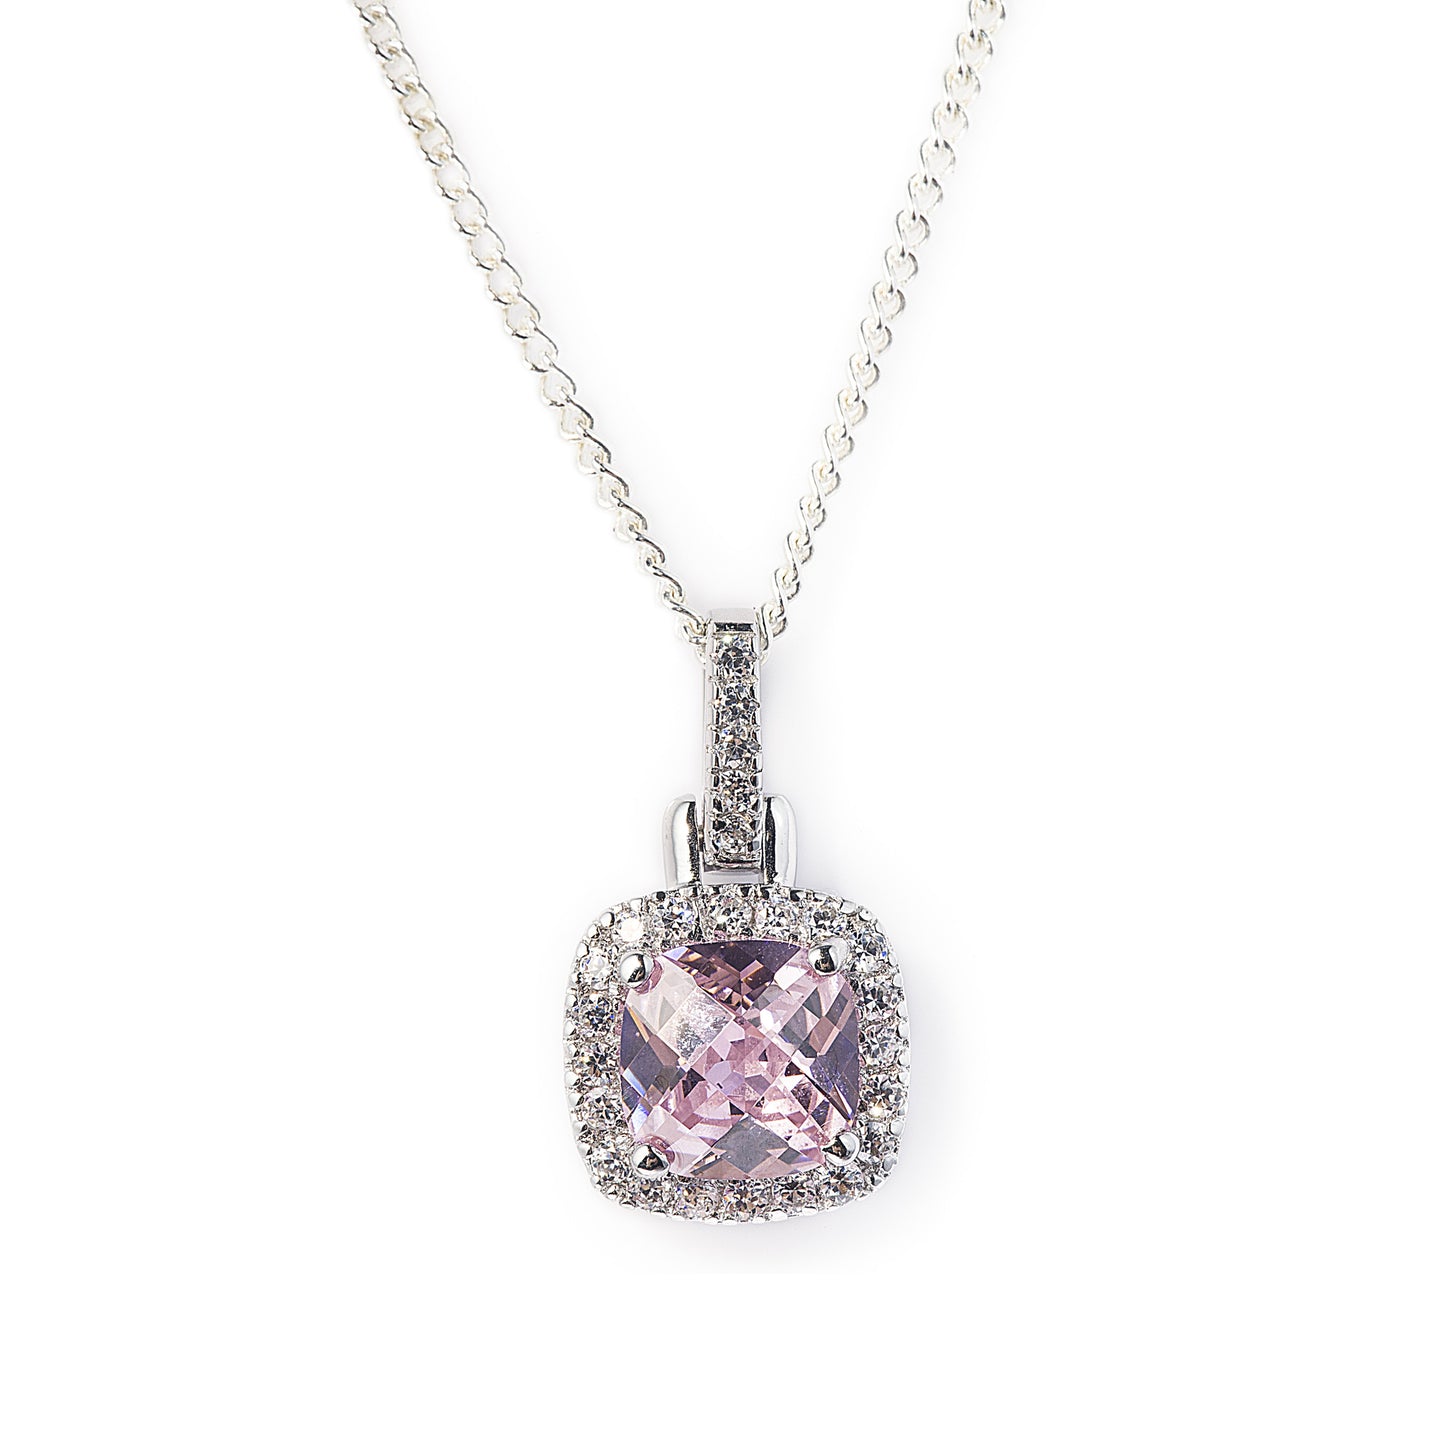 Pink Princess Necklace in 925 Sterling Silver with Pink & Clear Cubic Zirconia. Matching ring available. Worldwide shipping. Affordable luxury jewellery by Bellagio & Co.